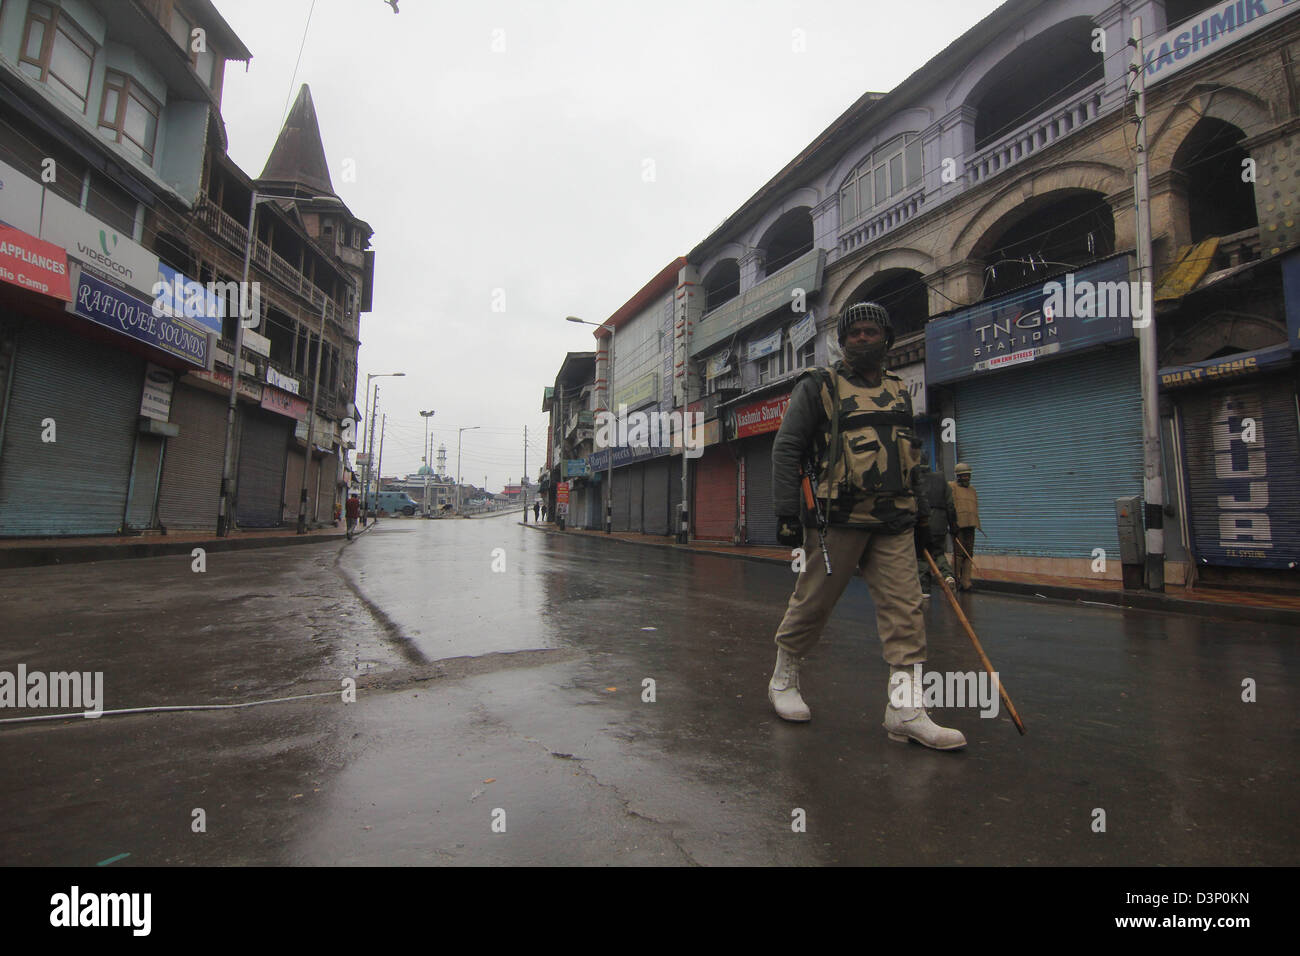 Feb. 22, 2013 - Srinagar, Kashmir, India - An Indian paramilitary soldiers  stands guard   during curfew in Srinagar, the summer capital of Indian Kashmir. on 22/2/2013,Authorities have imposed curfew or restrictions on movement of people in most parts of Kashmir Valley to foil plans of separatists to hold protests demanding handing over of the body of indian  Parliament attack convict Mohammad Afzal Guru to his family. Curfew has been imposed in 11 police station areas of Srinagar city and some other towns of the Valley as a precautionary measure, a police spokesman said on Friday. .Photo/Alt Stock Photo